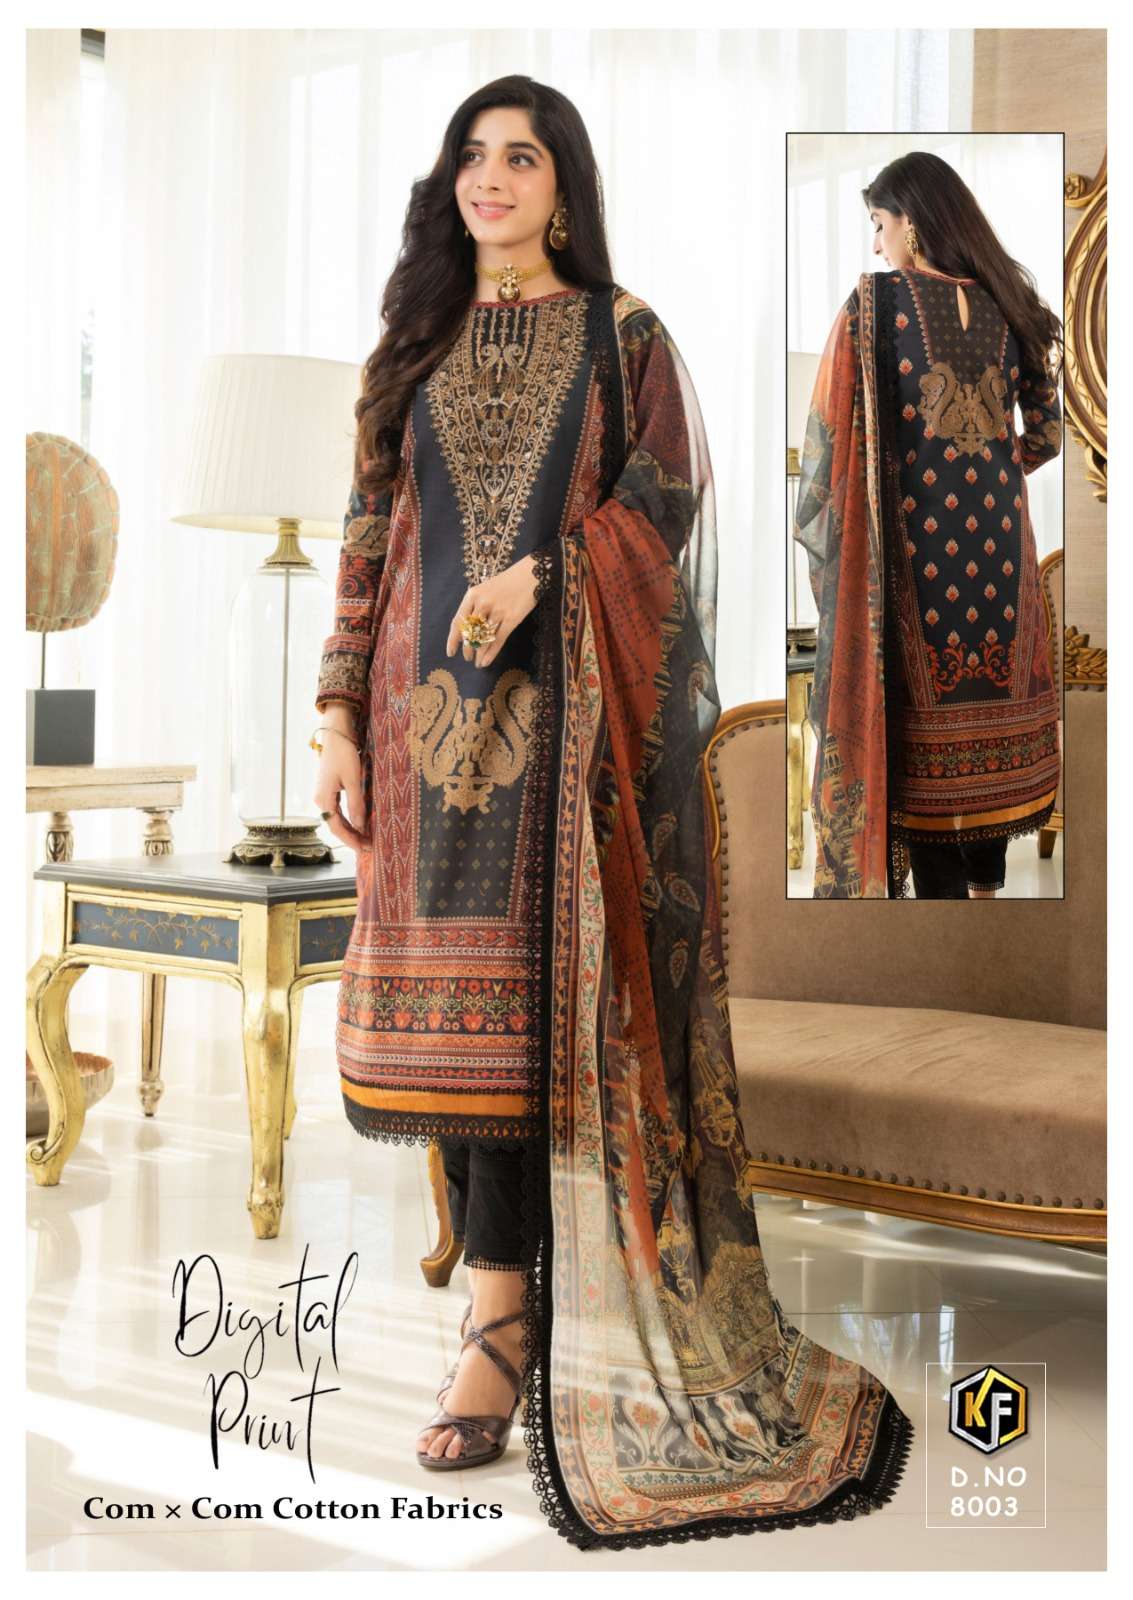 keval fab sobia nazir vol-8 8001-8006 series exclusive karachi print with expensive designer collection surat